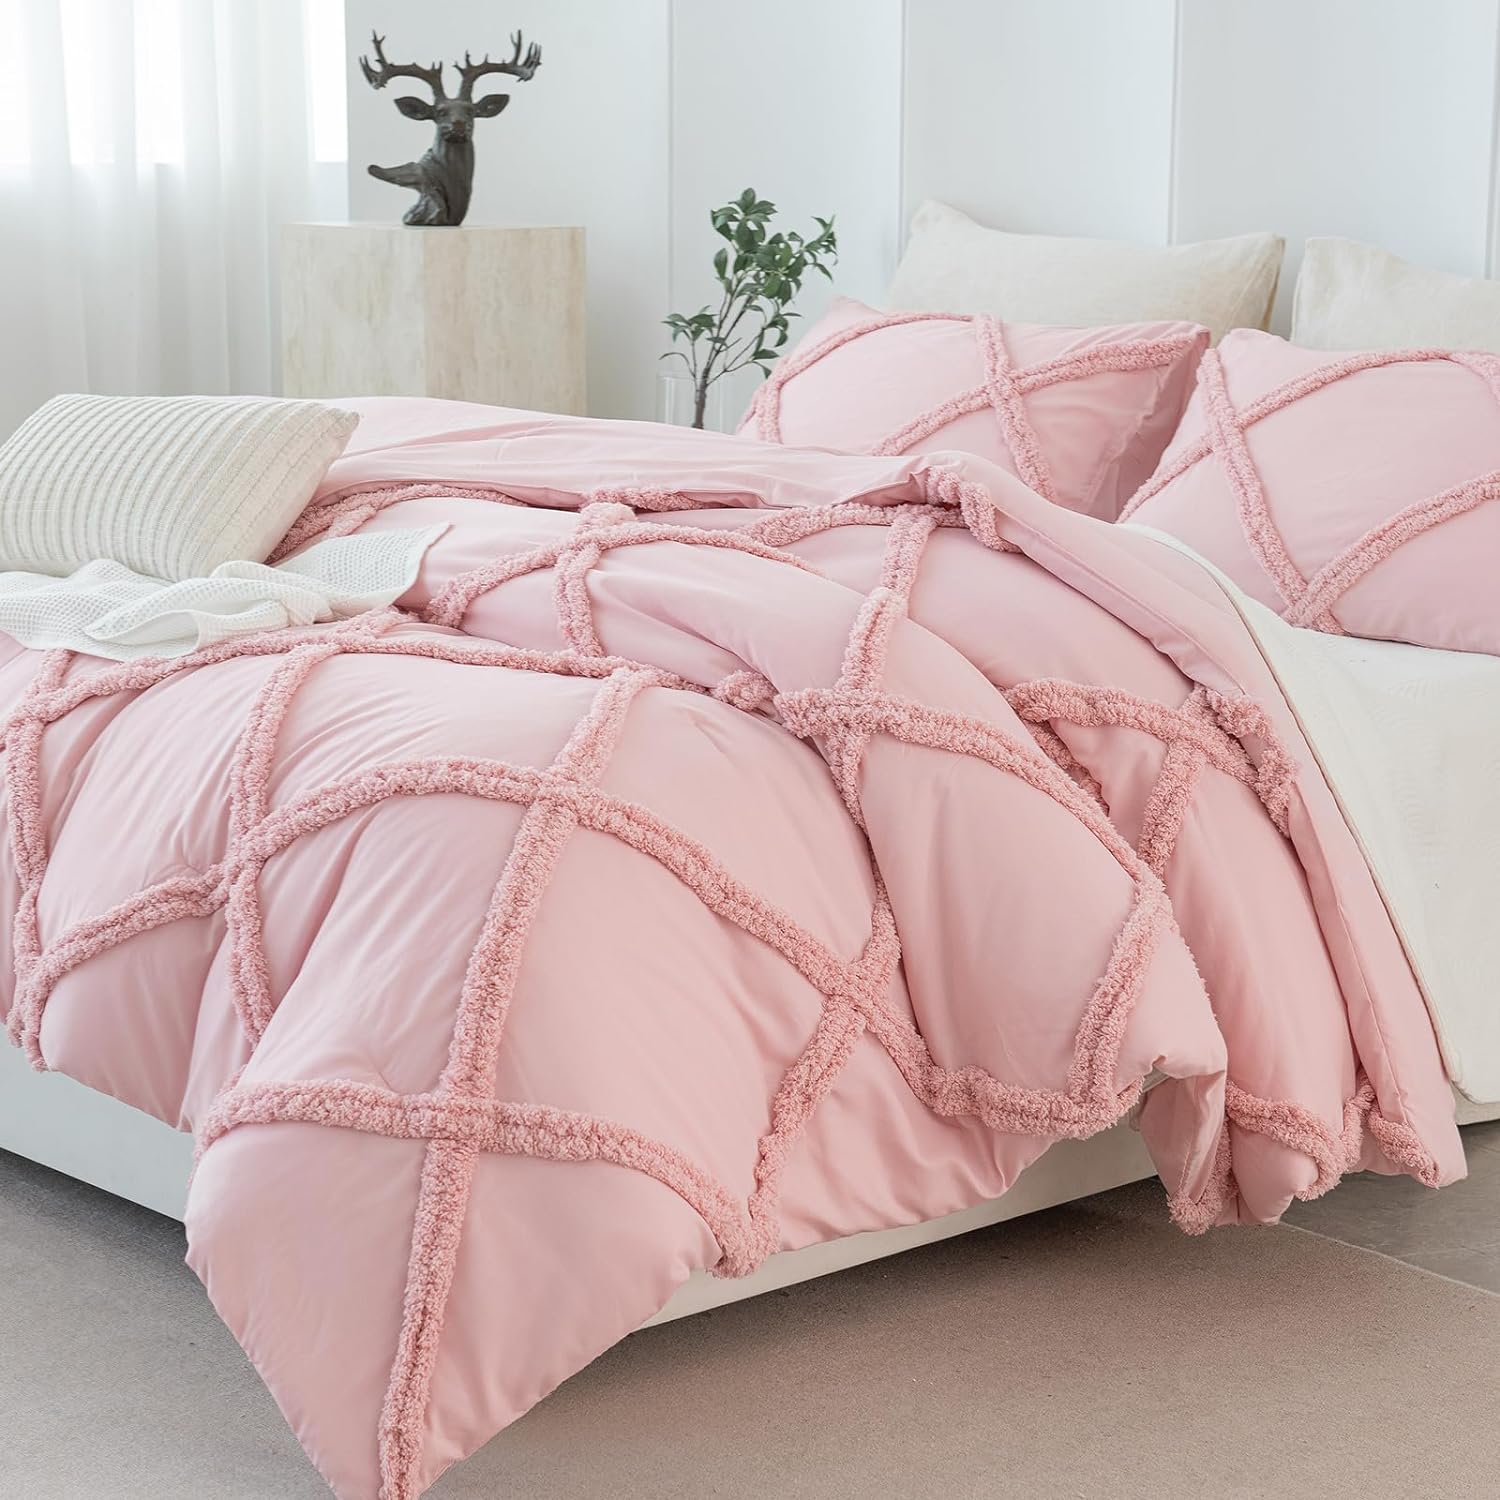 Bedbay Pink Queen Comforter Set Room Decor Aesthetic Bedding Queen Size Diamond Tufted Shabby Chic Bedding Soft Lightweight 3 Pieces Farmhouse Boho Comforter Set - Pink,Queen